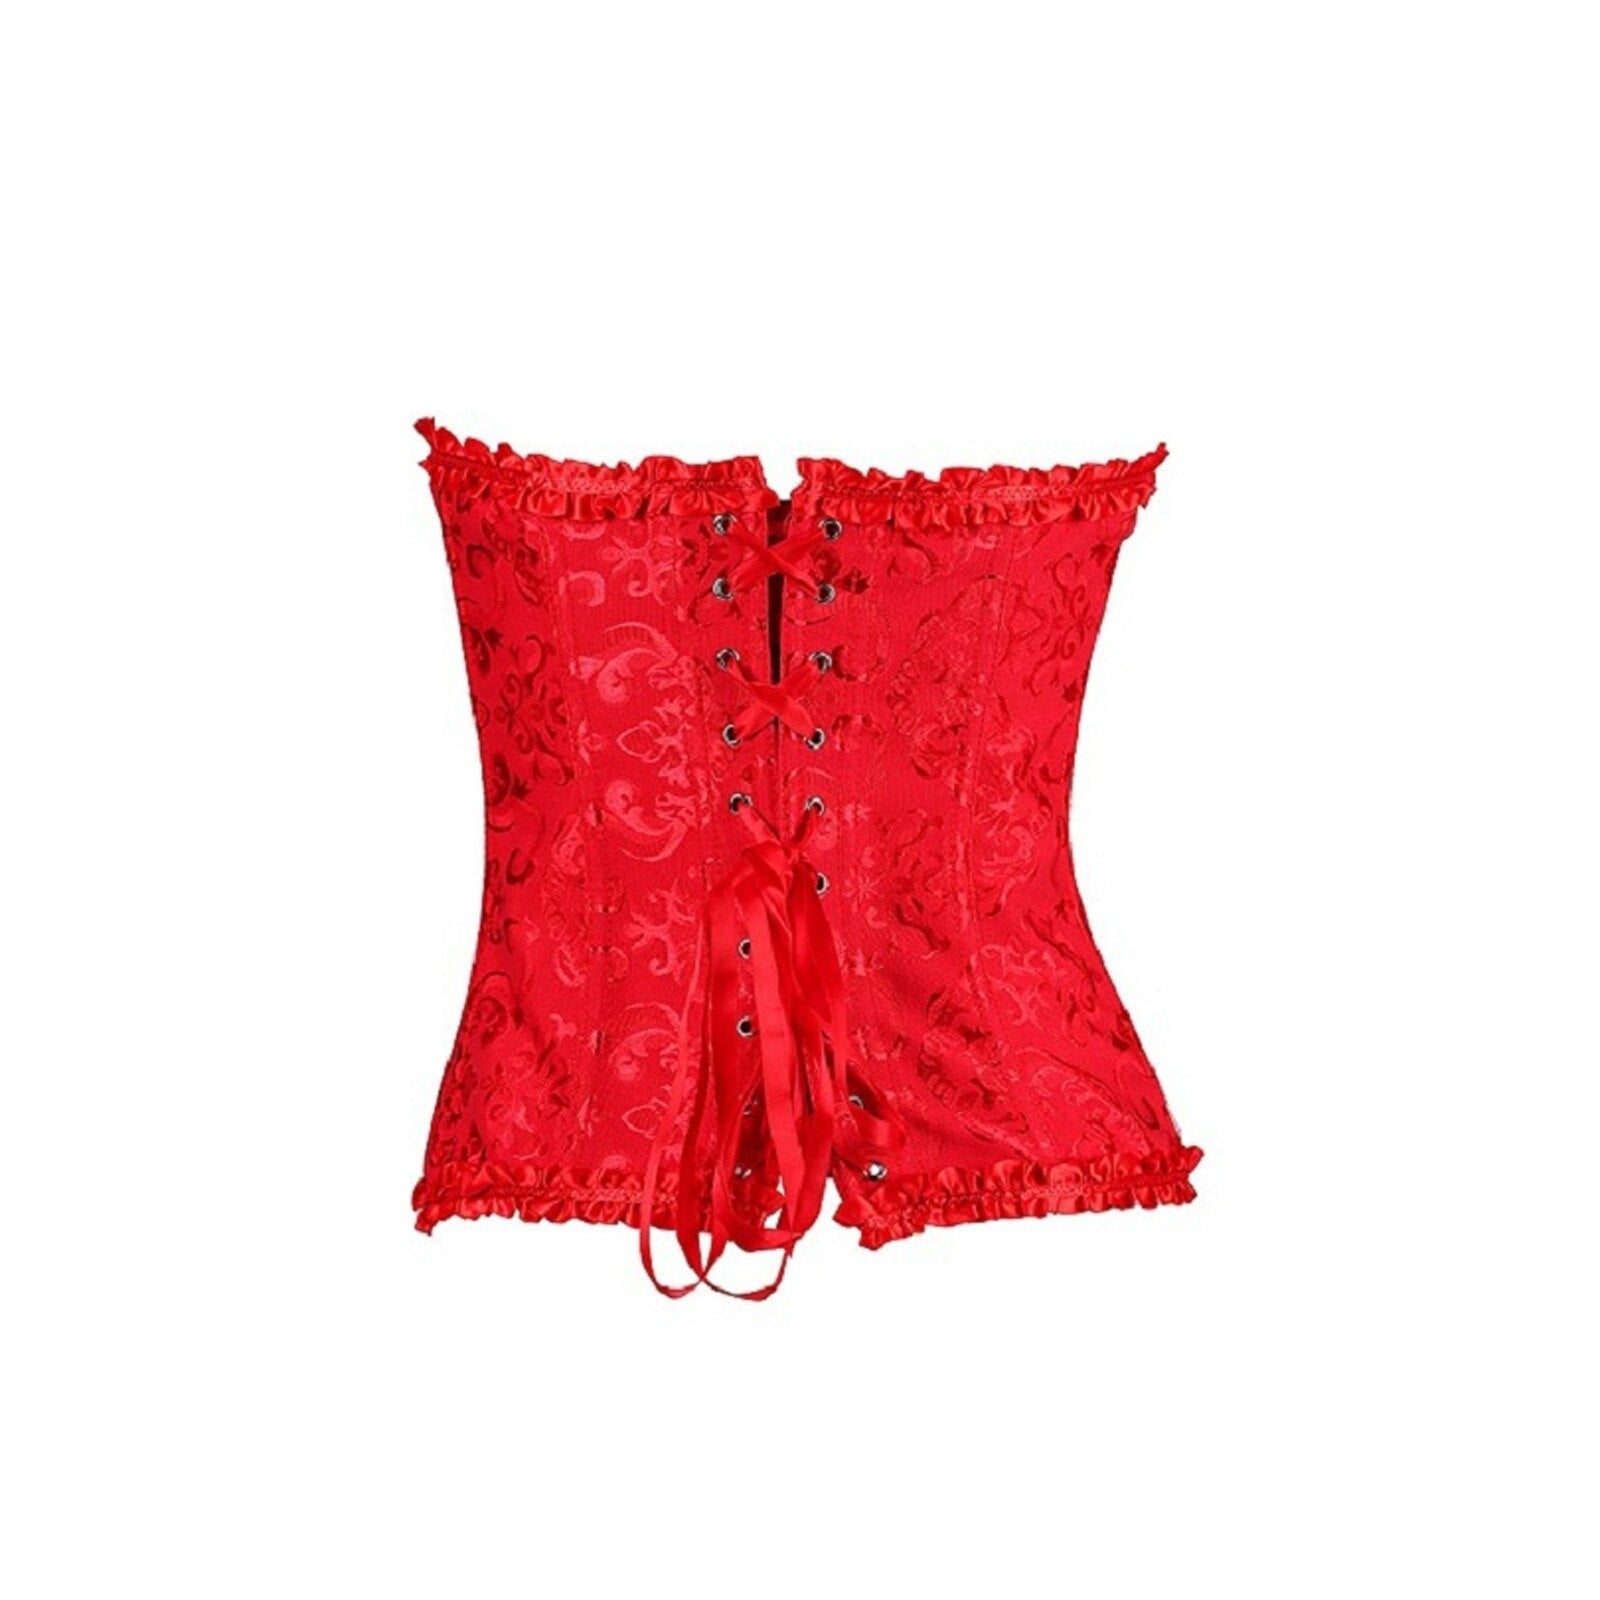 Corset Sexy Rouge Éclatant Everleigh,  corset femme medieval